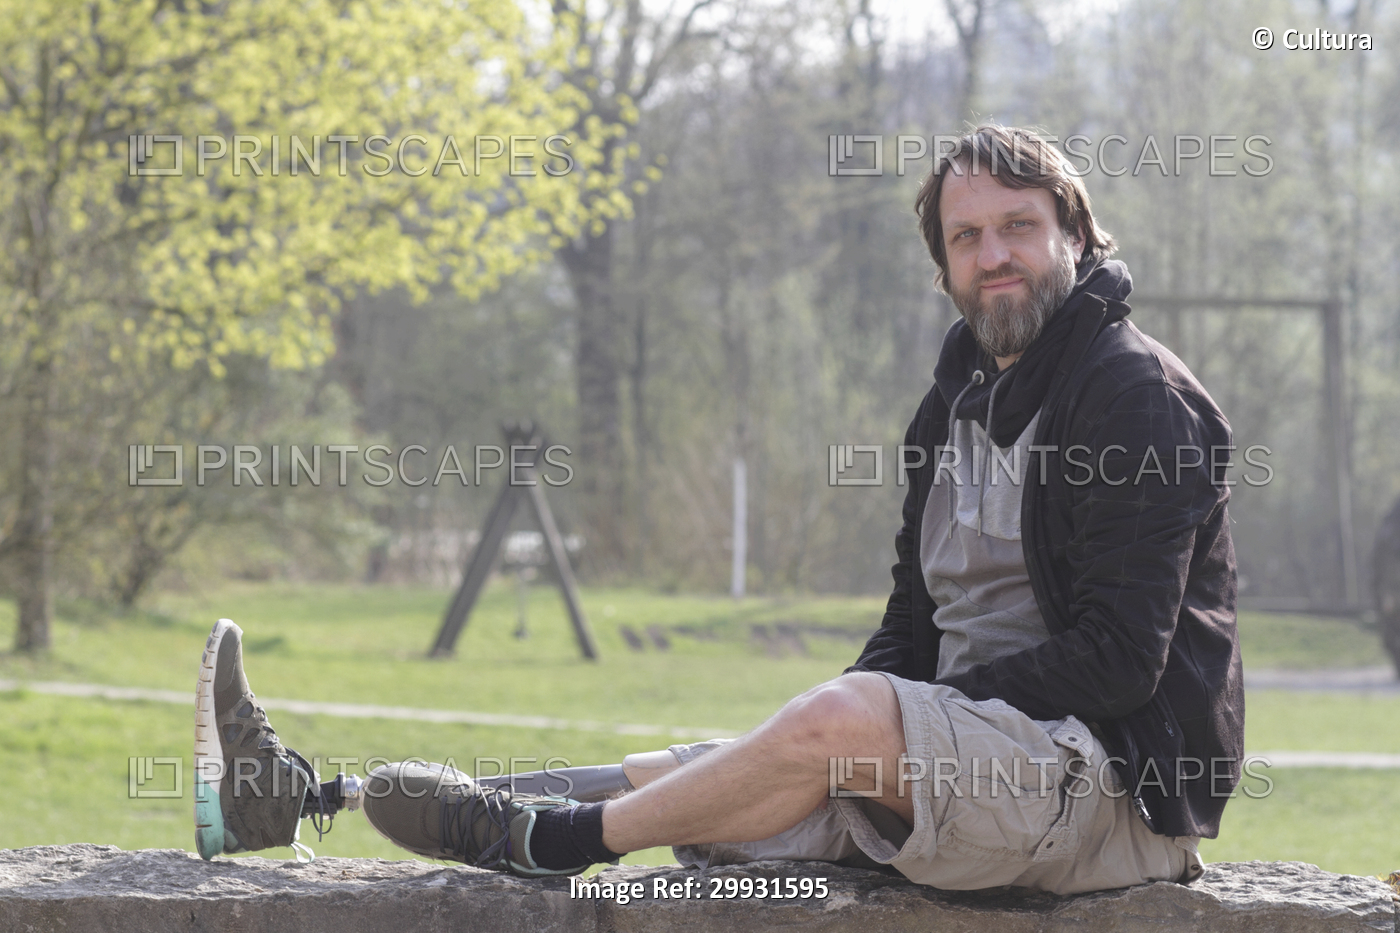 Portrait of man with prosthesis leg in park